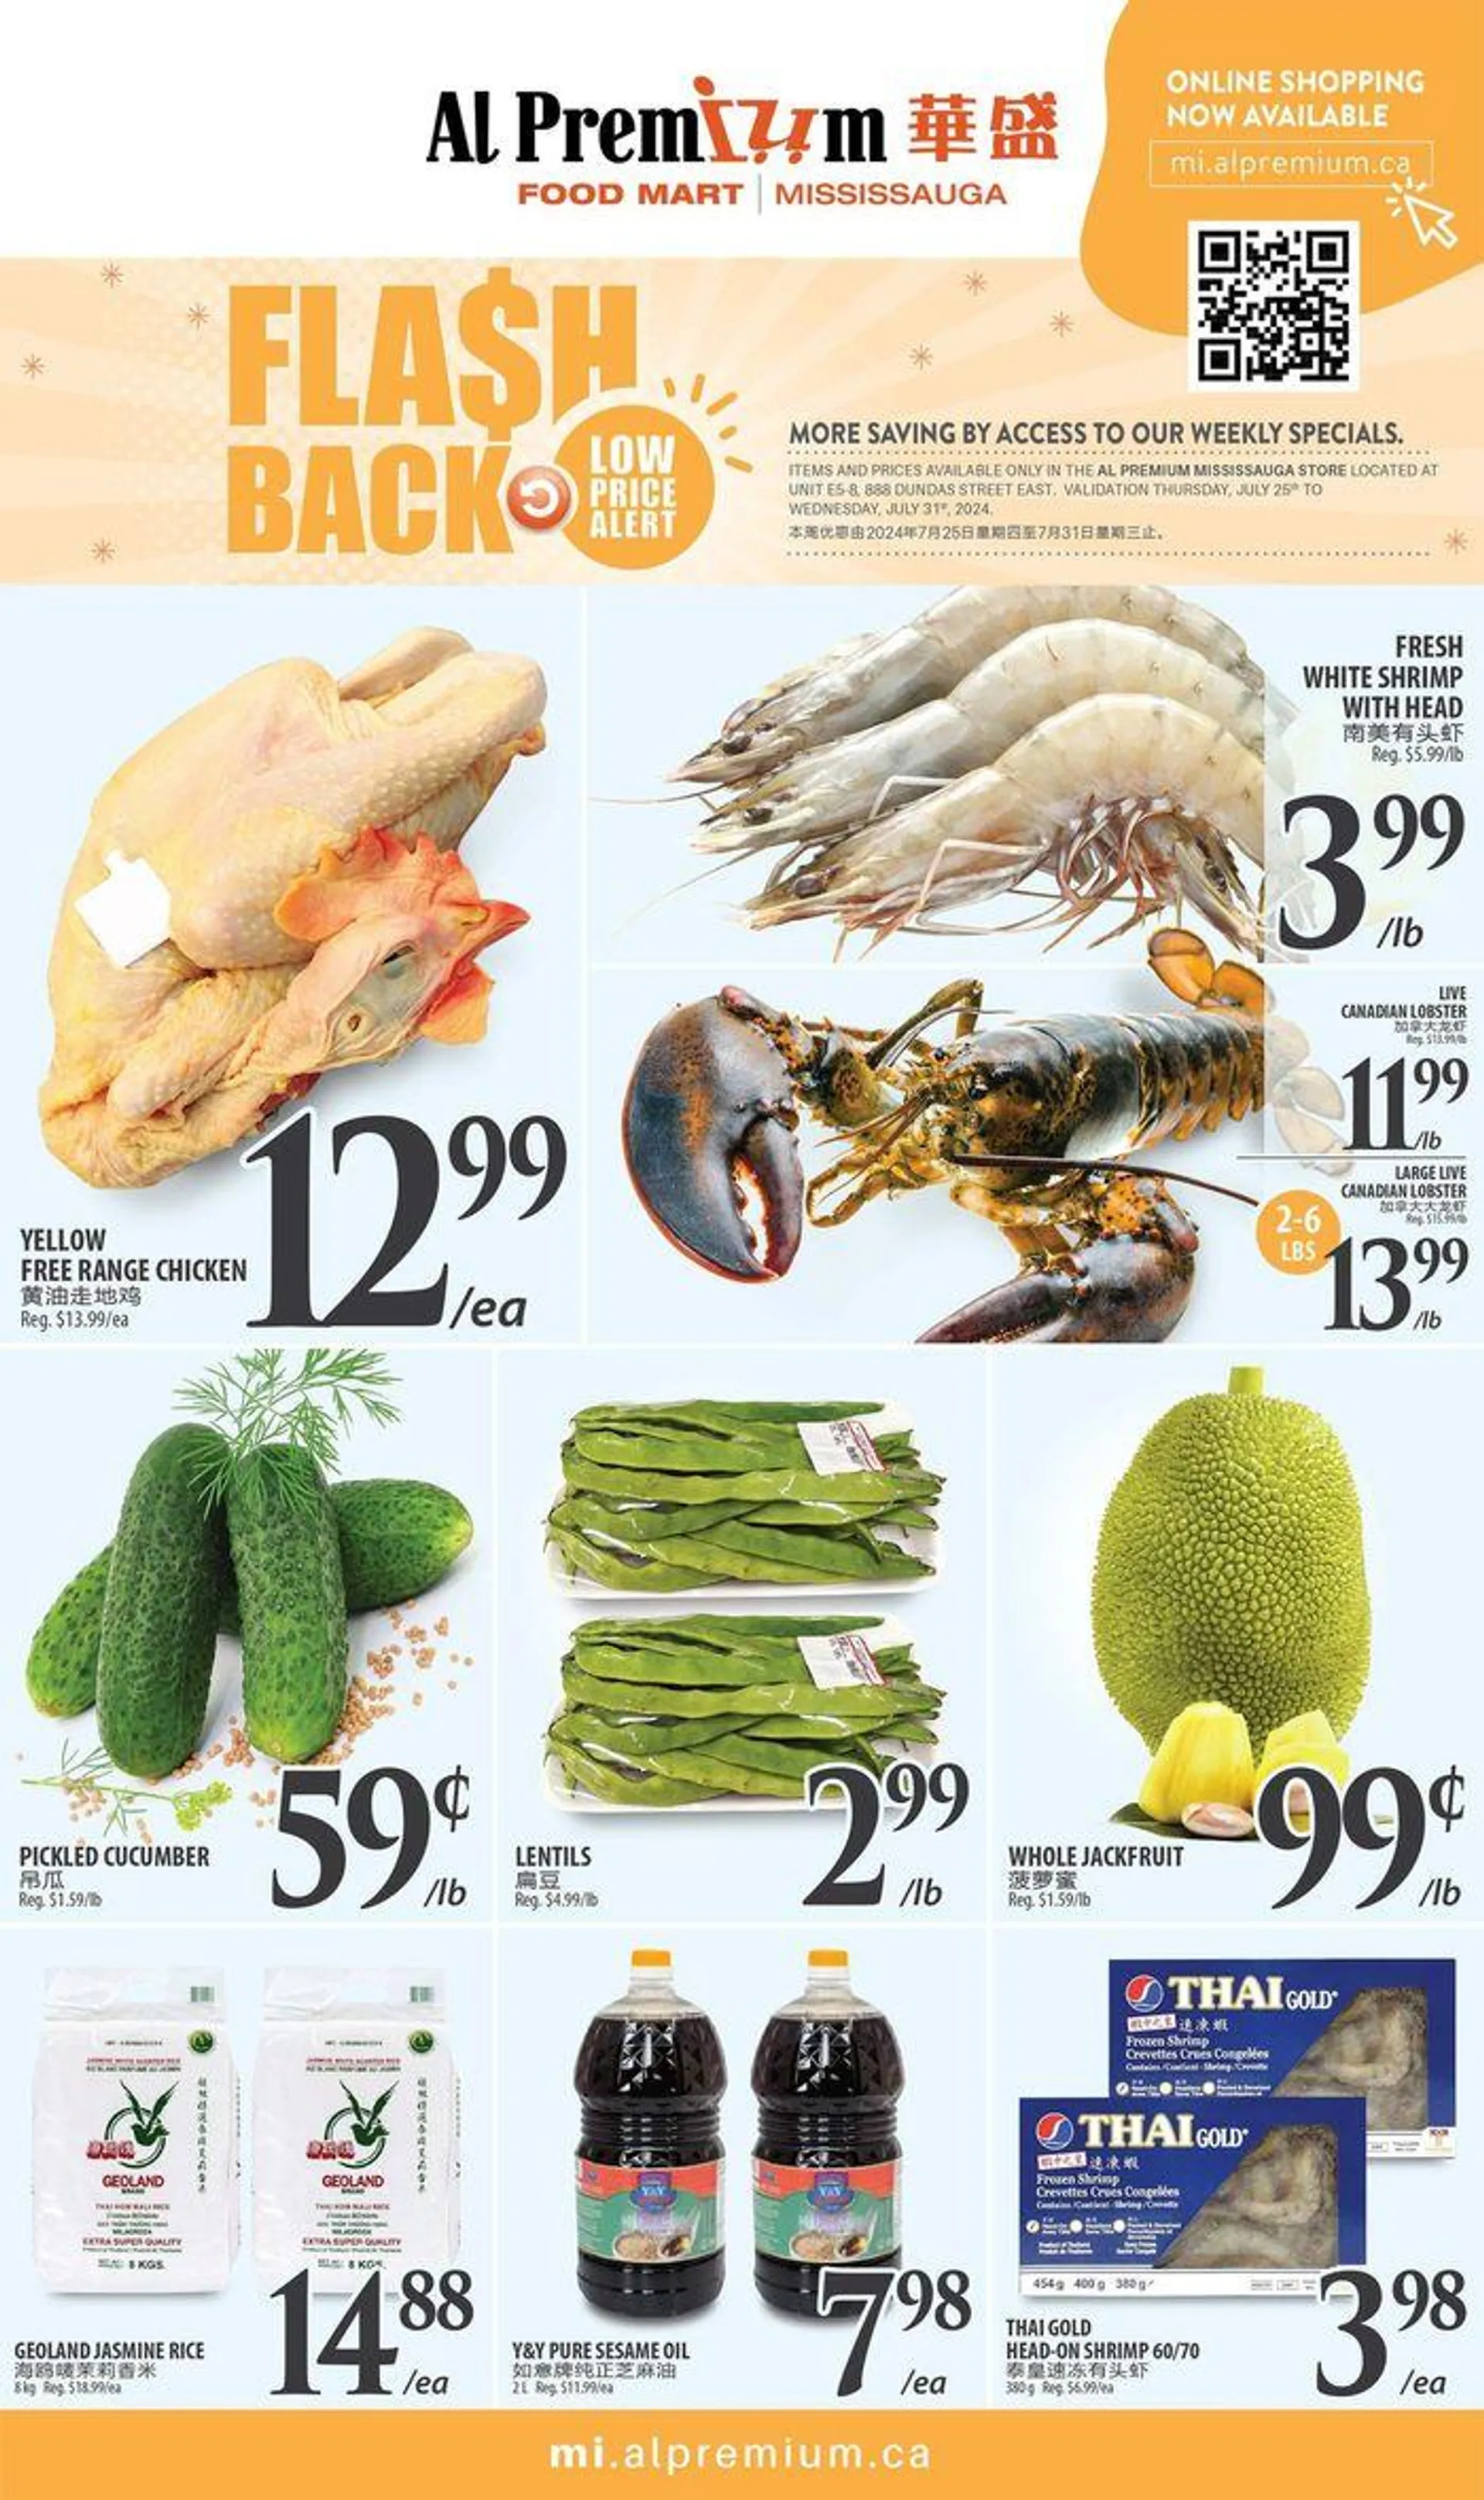 WEEKLY SPECIAL MISSISSAUGA - 1